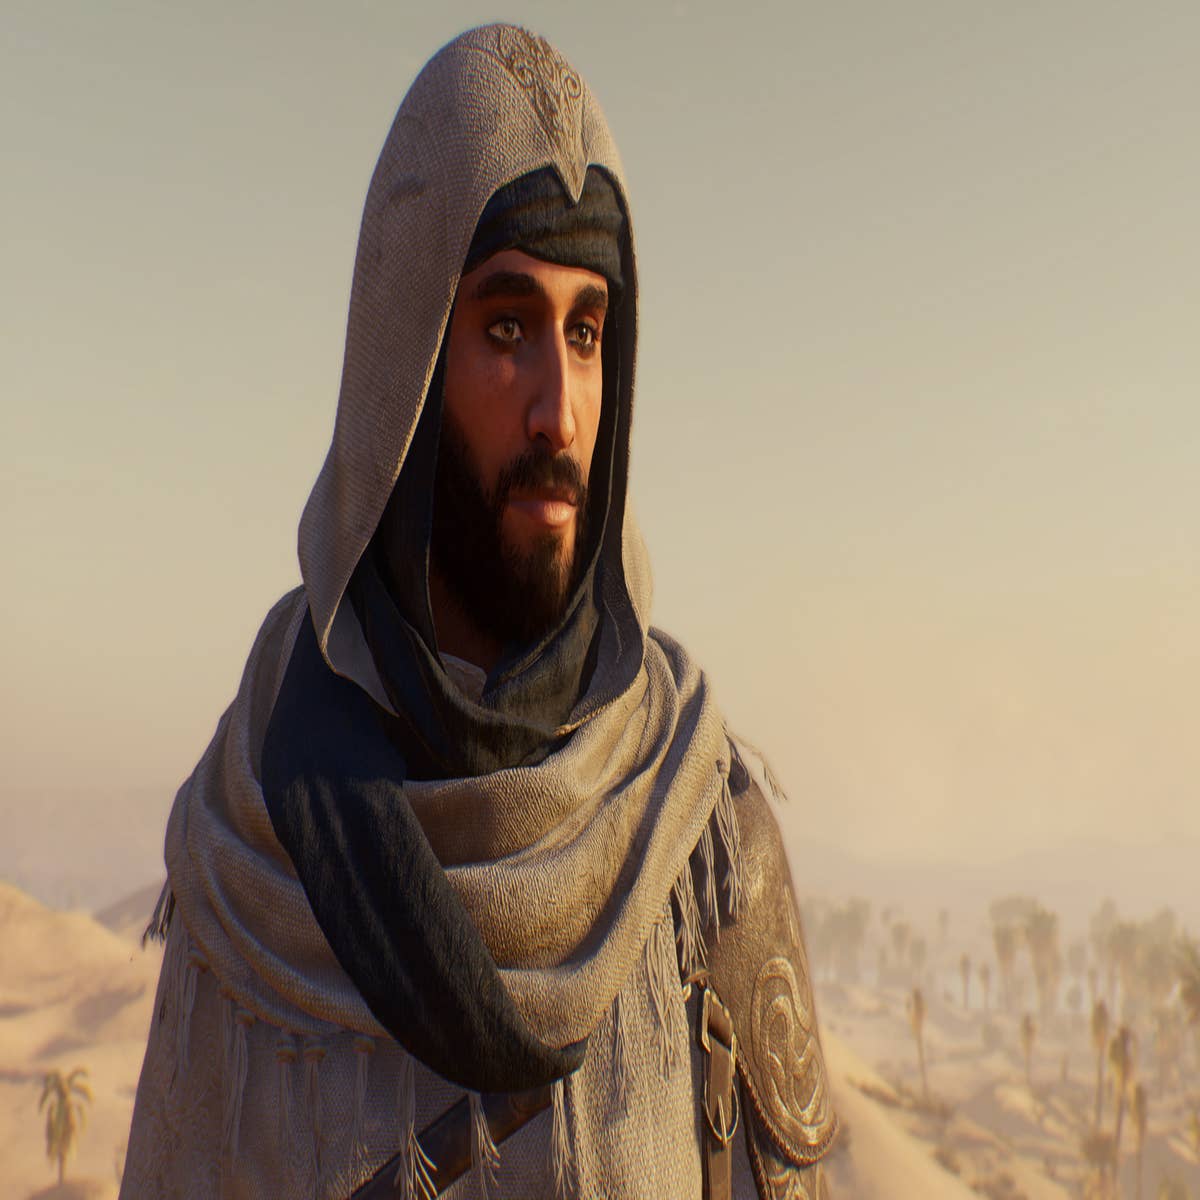 Assassin's Creed 2 System Requirements - Can I Run It